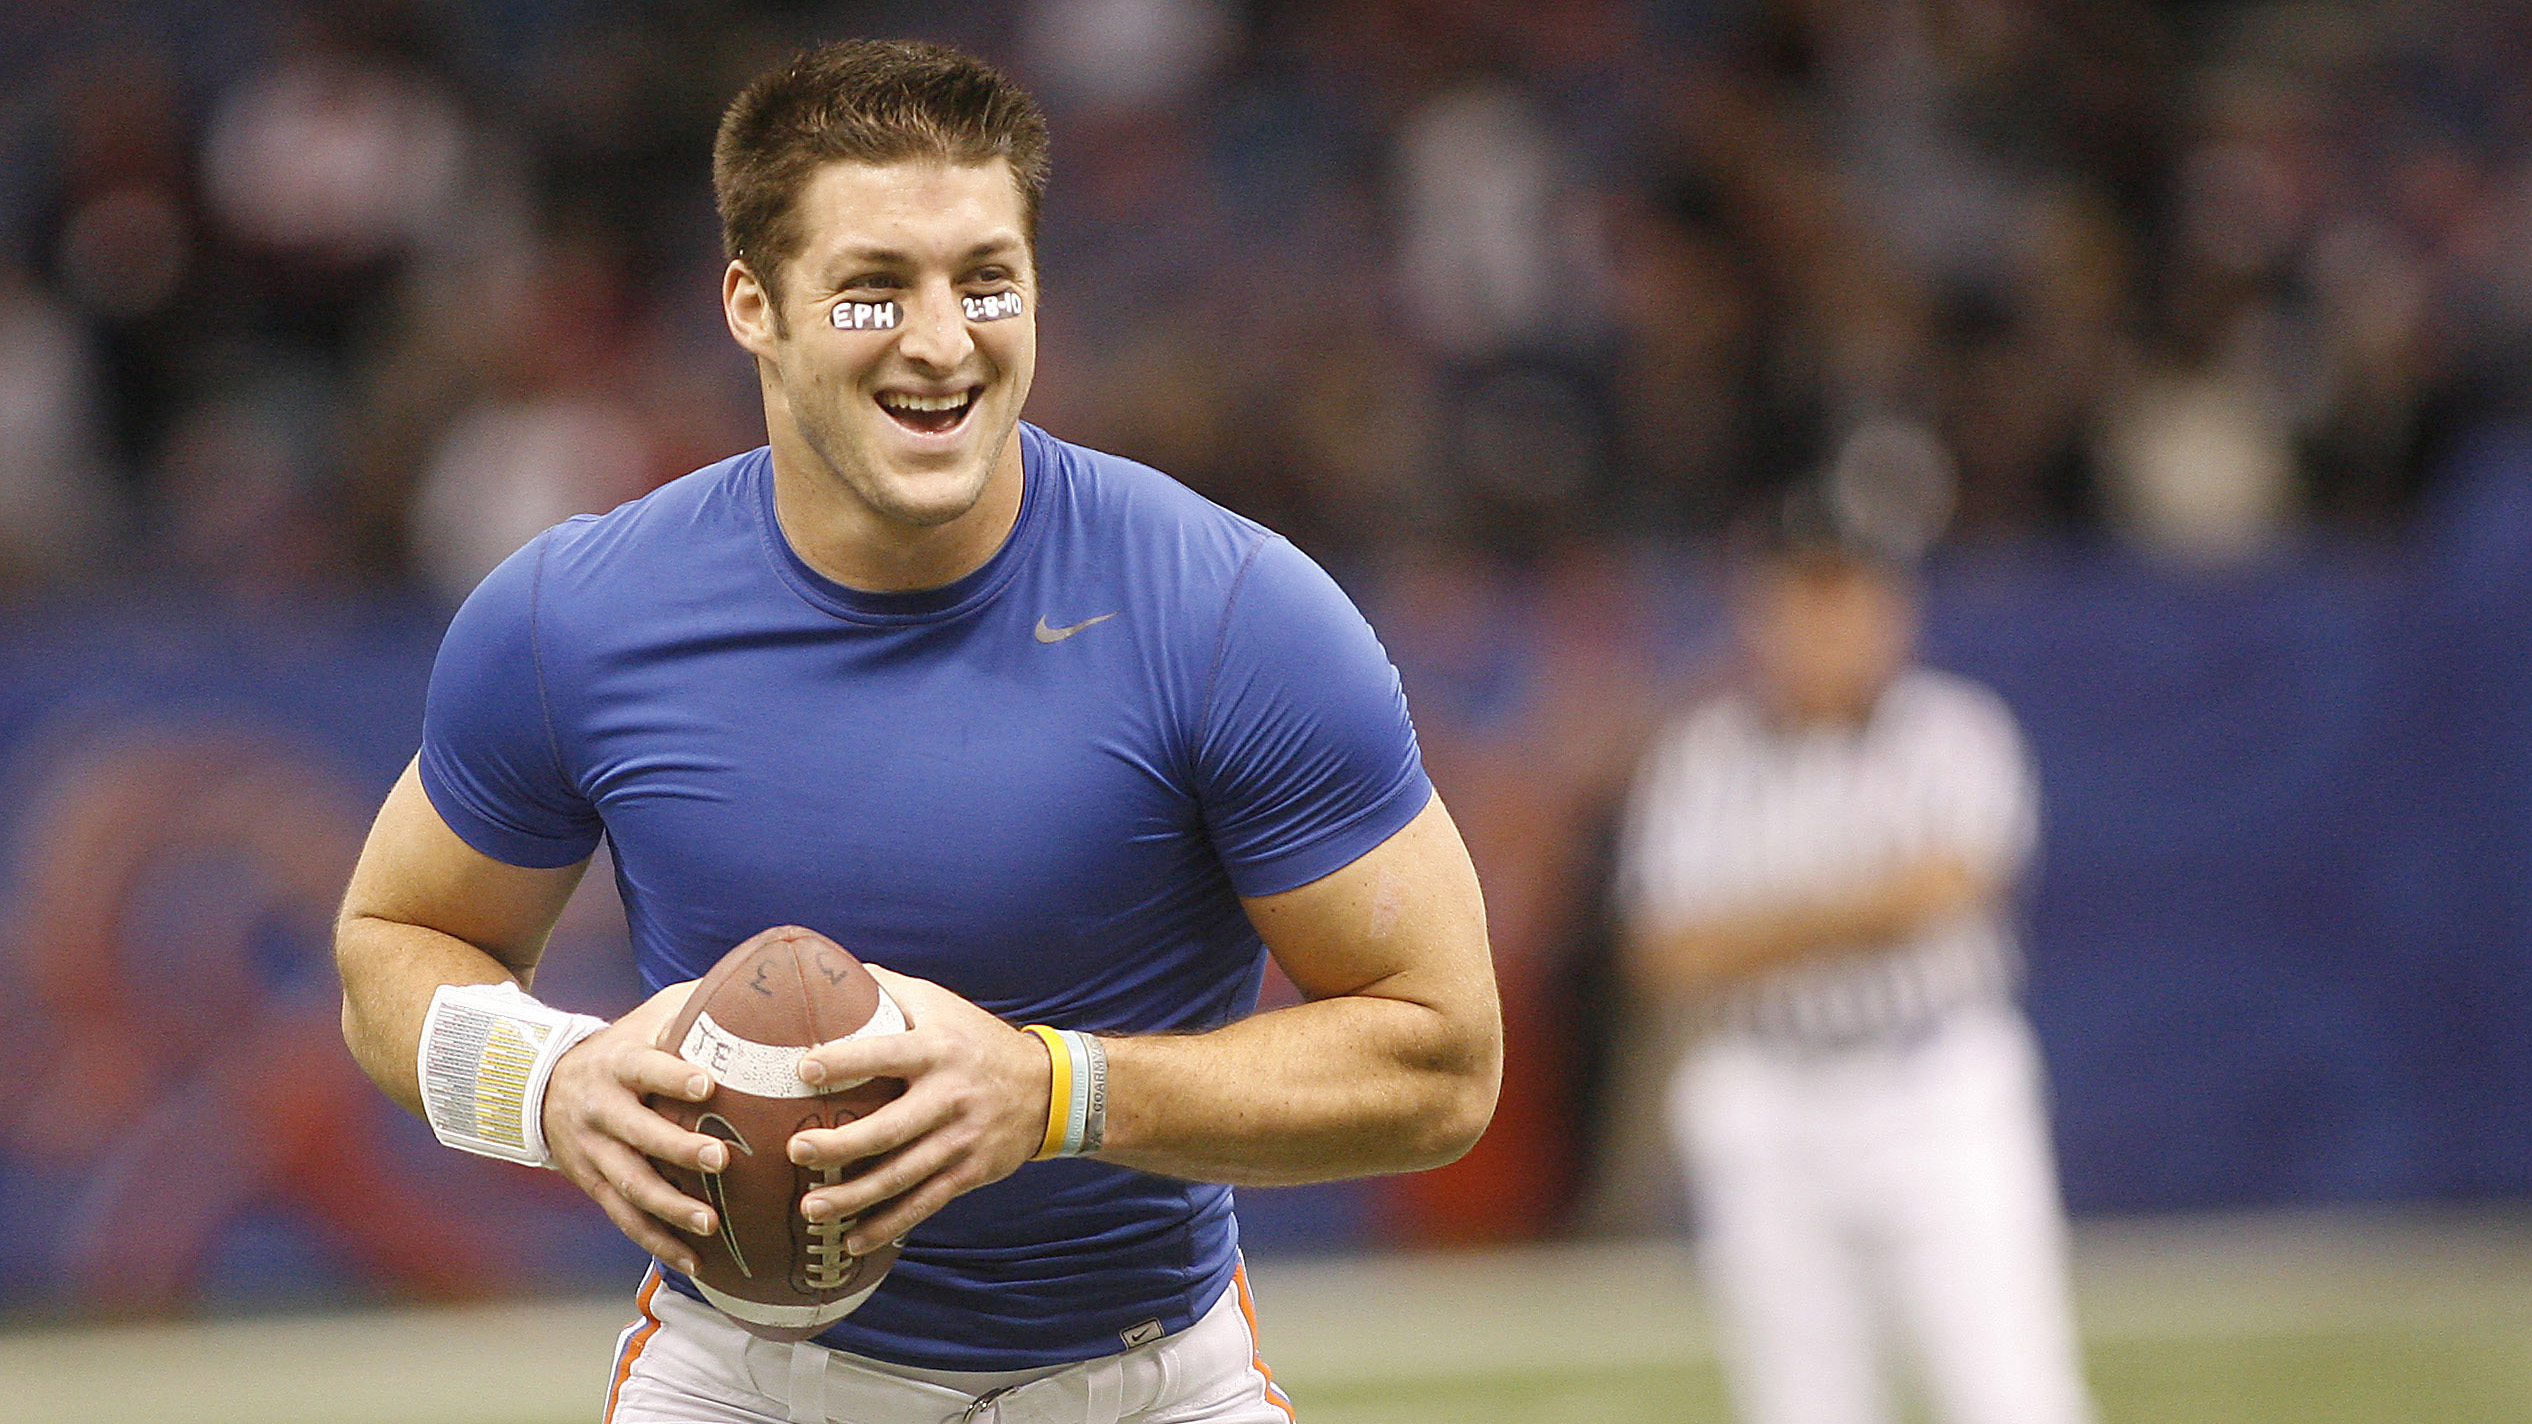 Does God Have a Tim Tebow Complex?